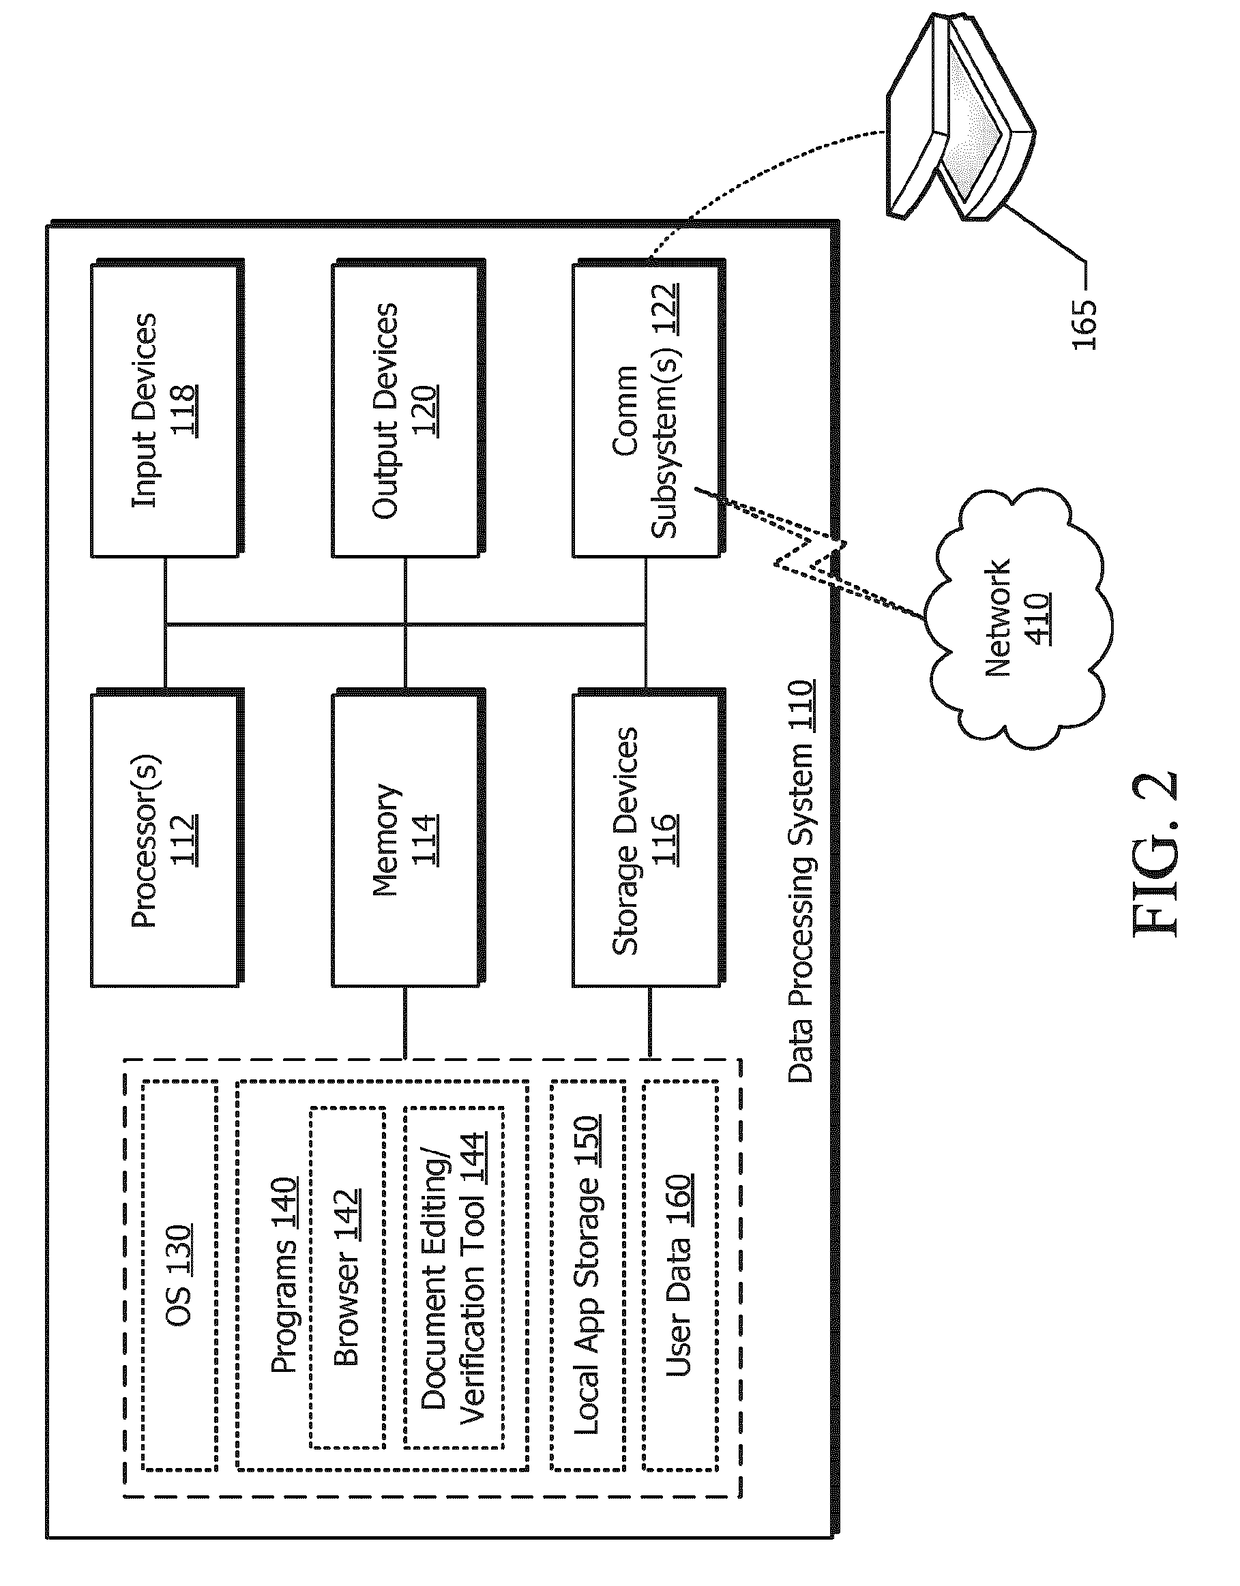 System and method for generating task-embedded documents